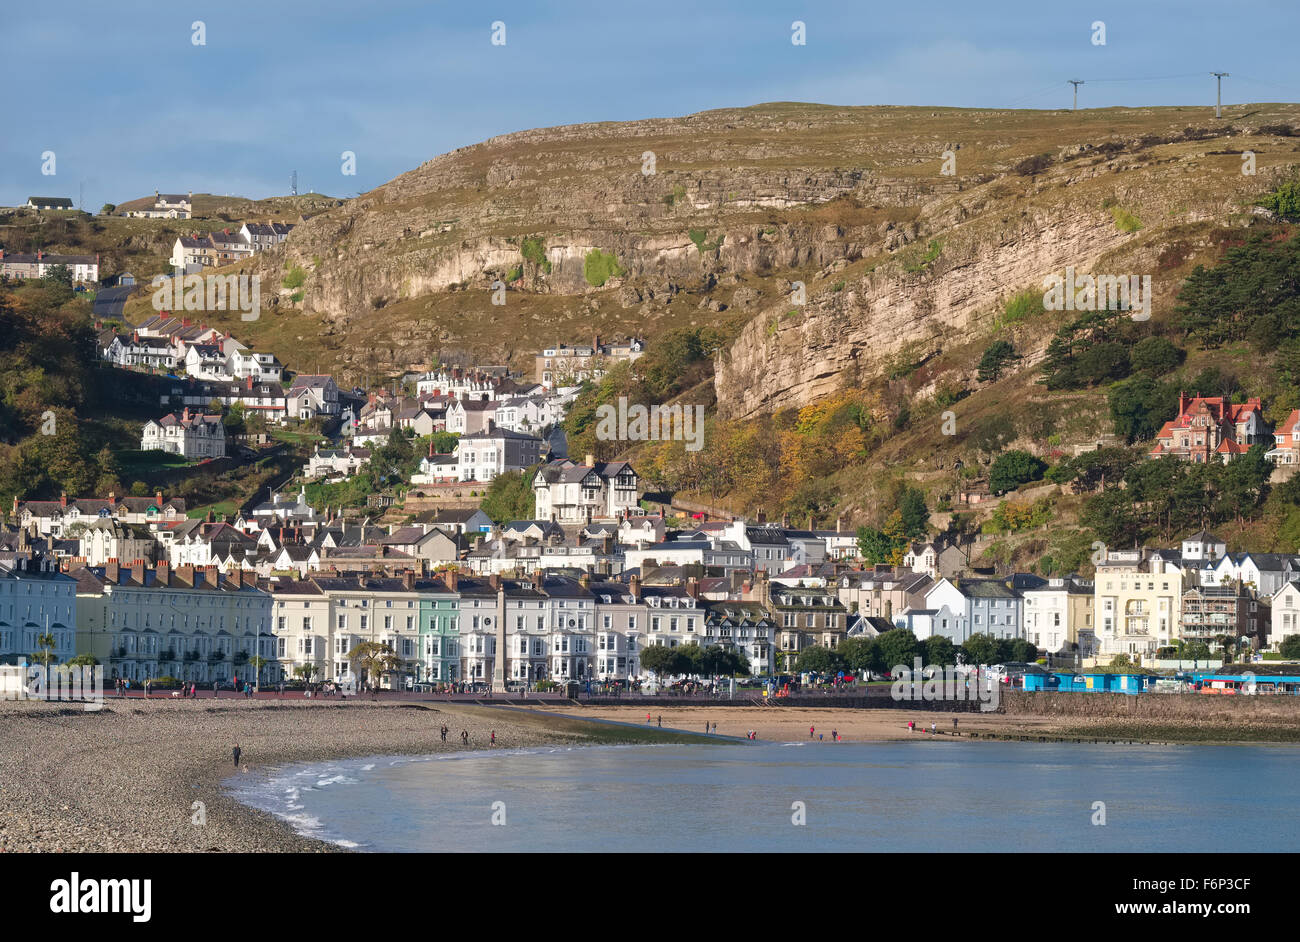 Houses and hotels on Llandudno seafront under the Great Orme, Conwy, Wales,UK Stock Photo